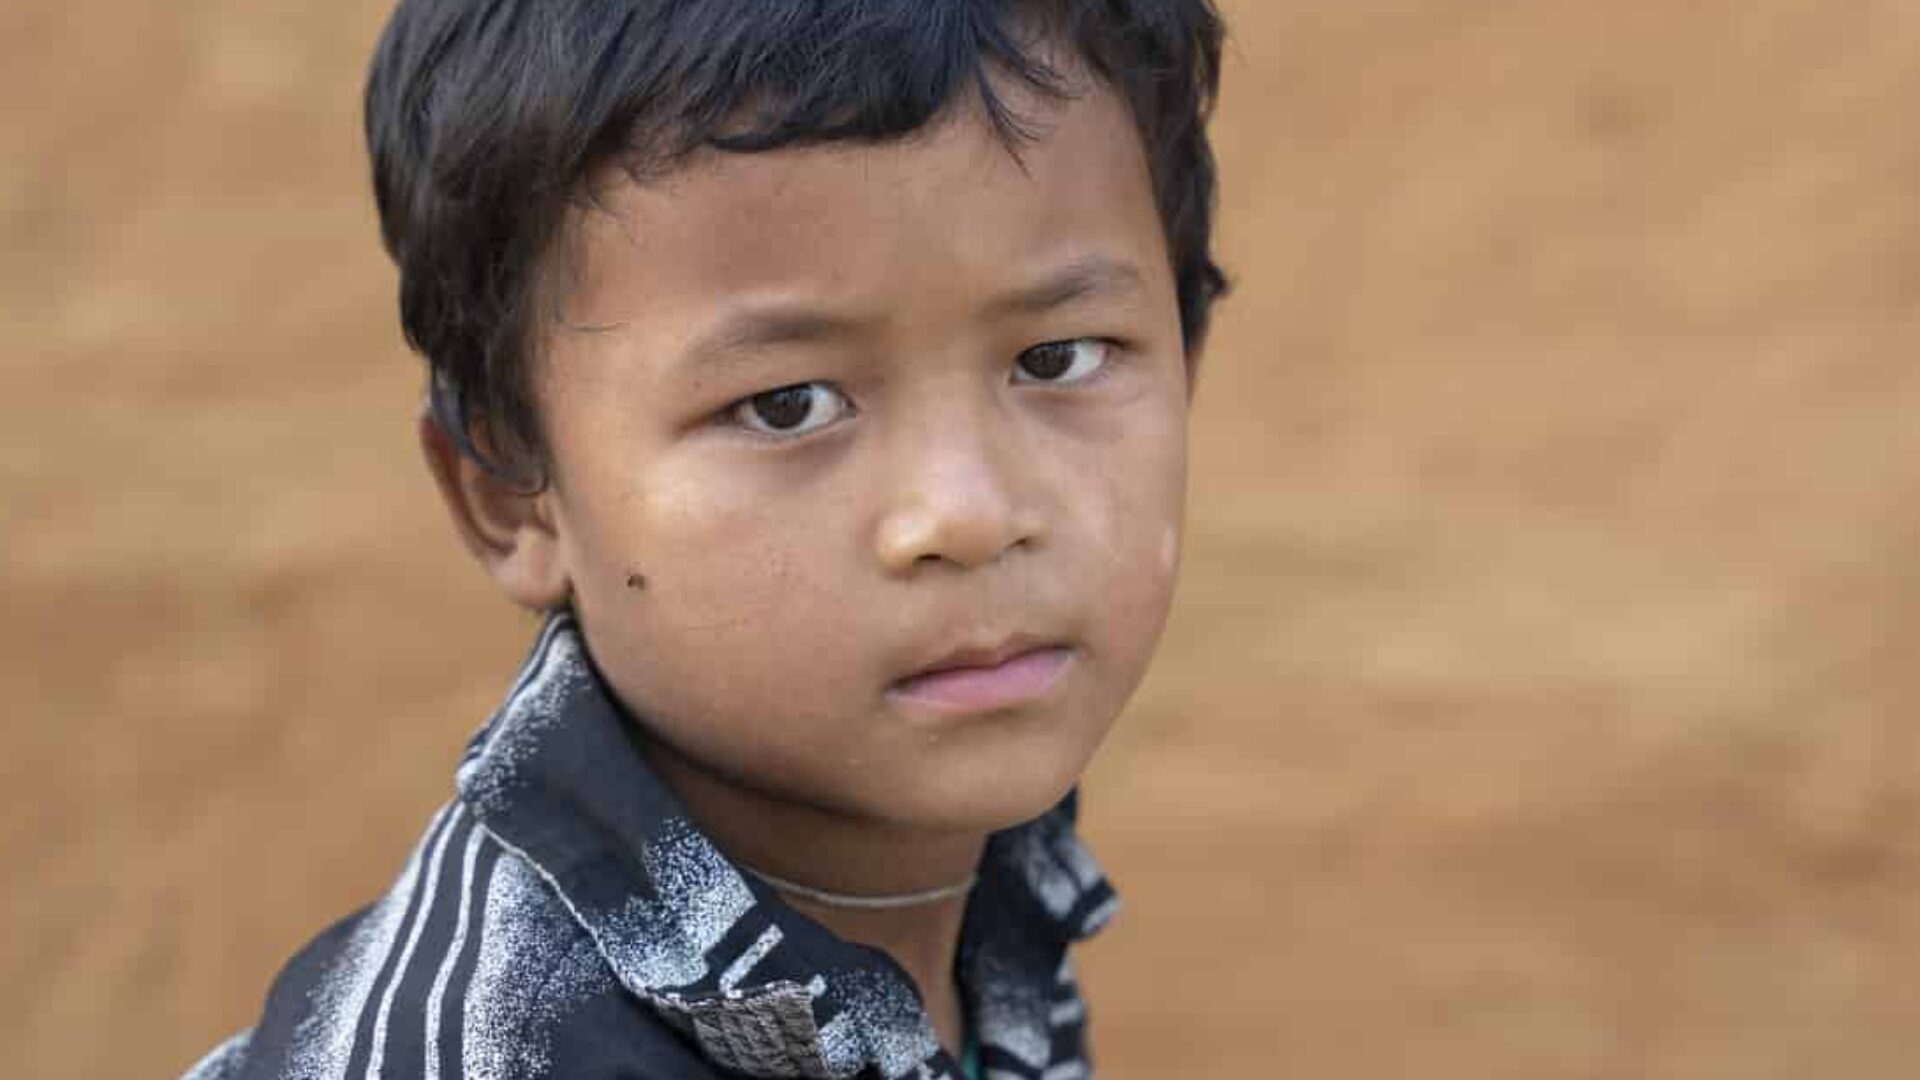 Young Nepali boy with short dark hair, in a striped polo shirt looks sadly sideways towards the camera, in front of brown earthen wall